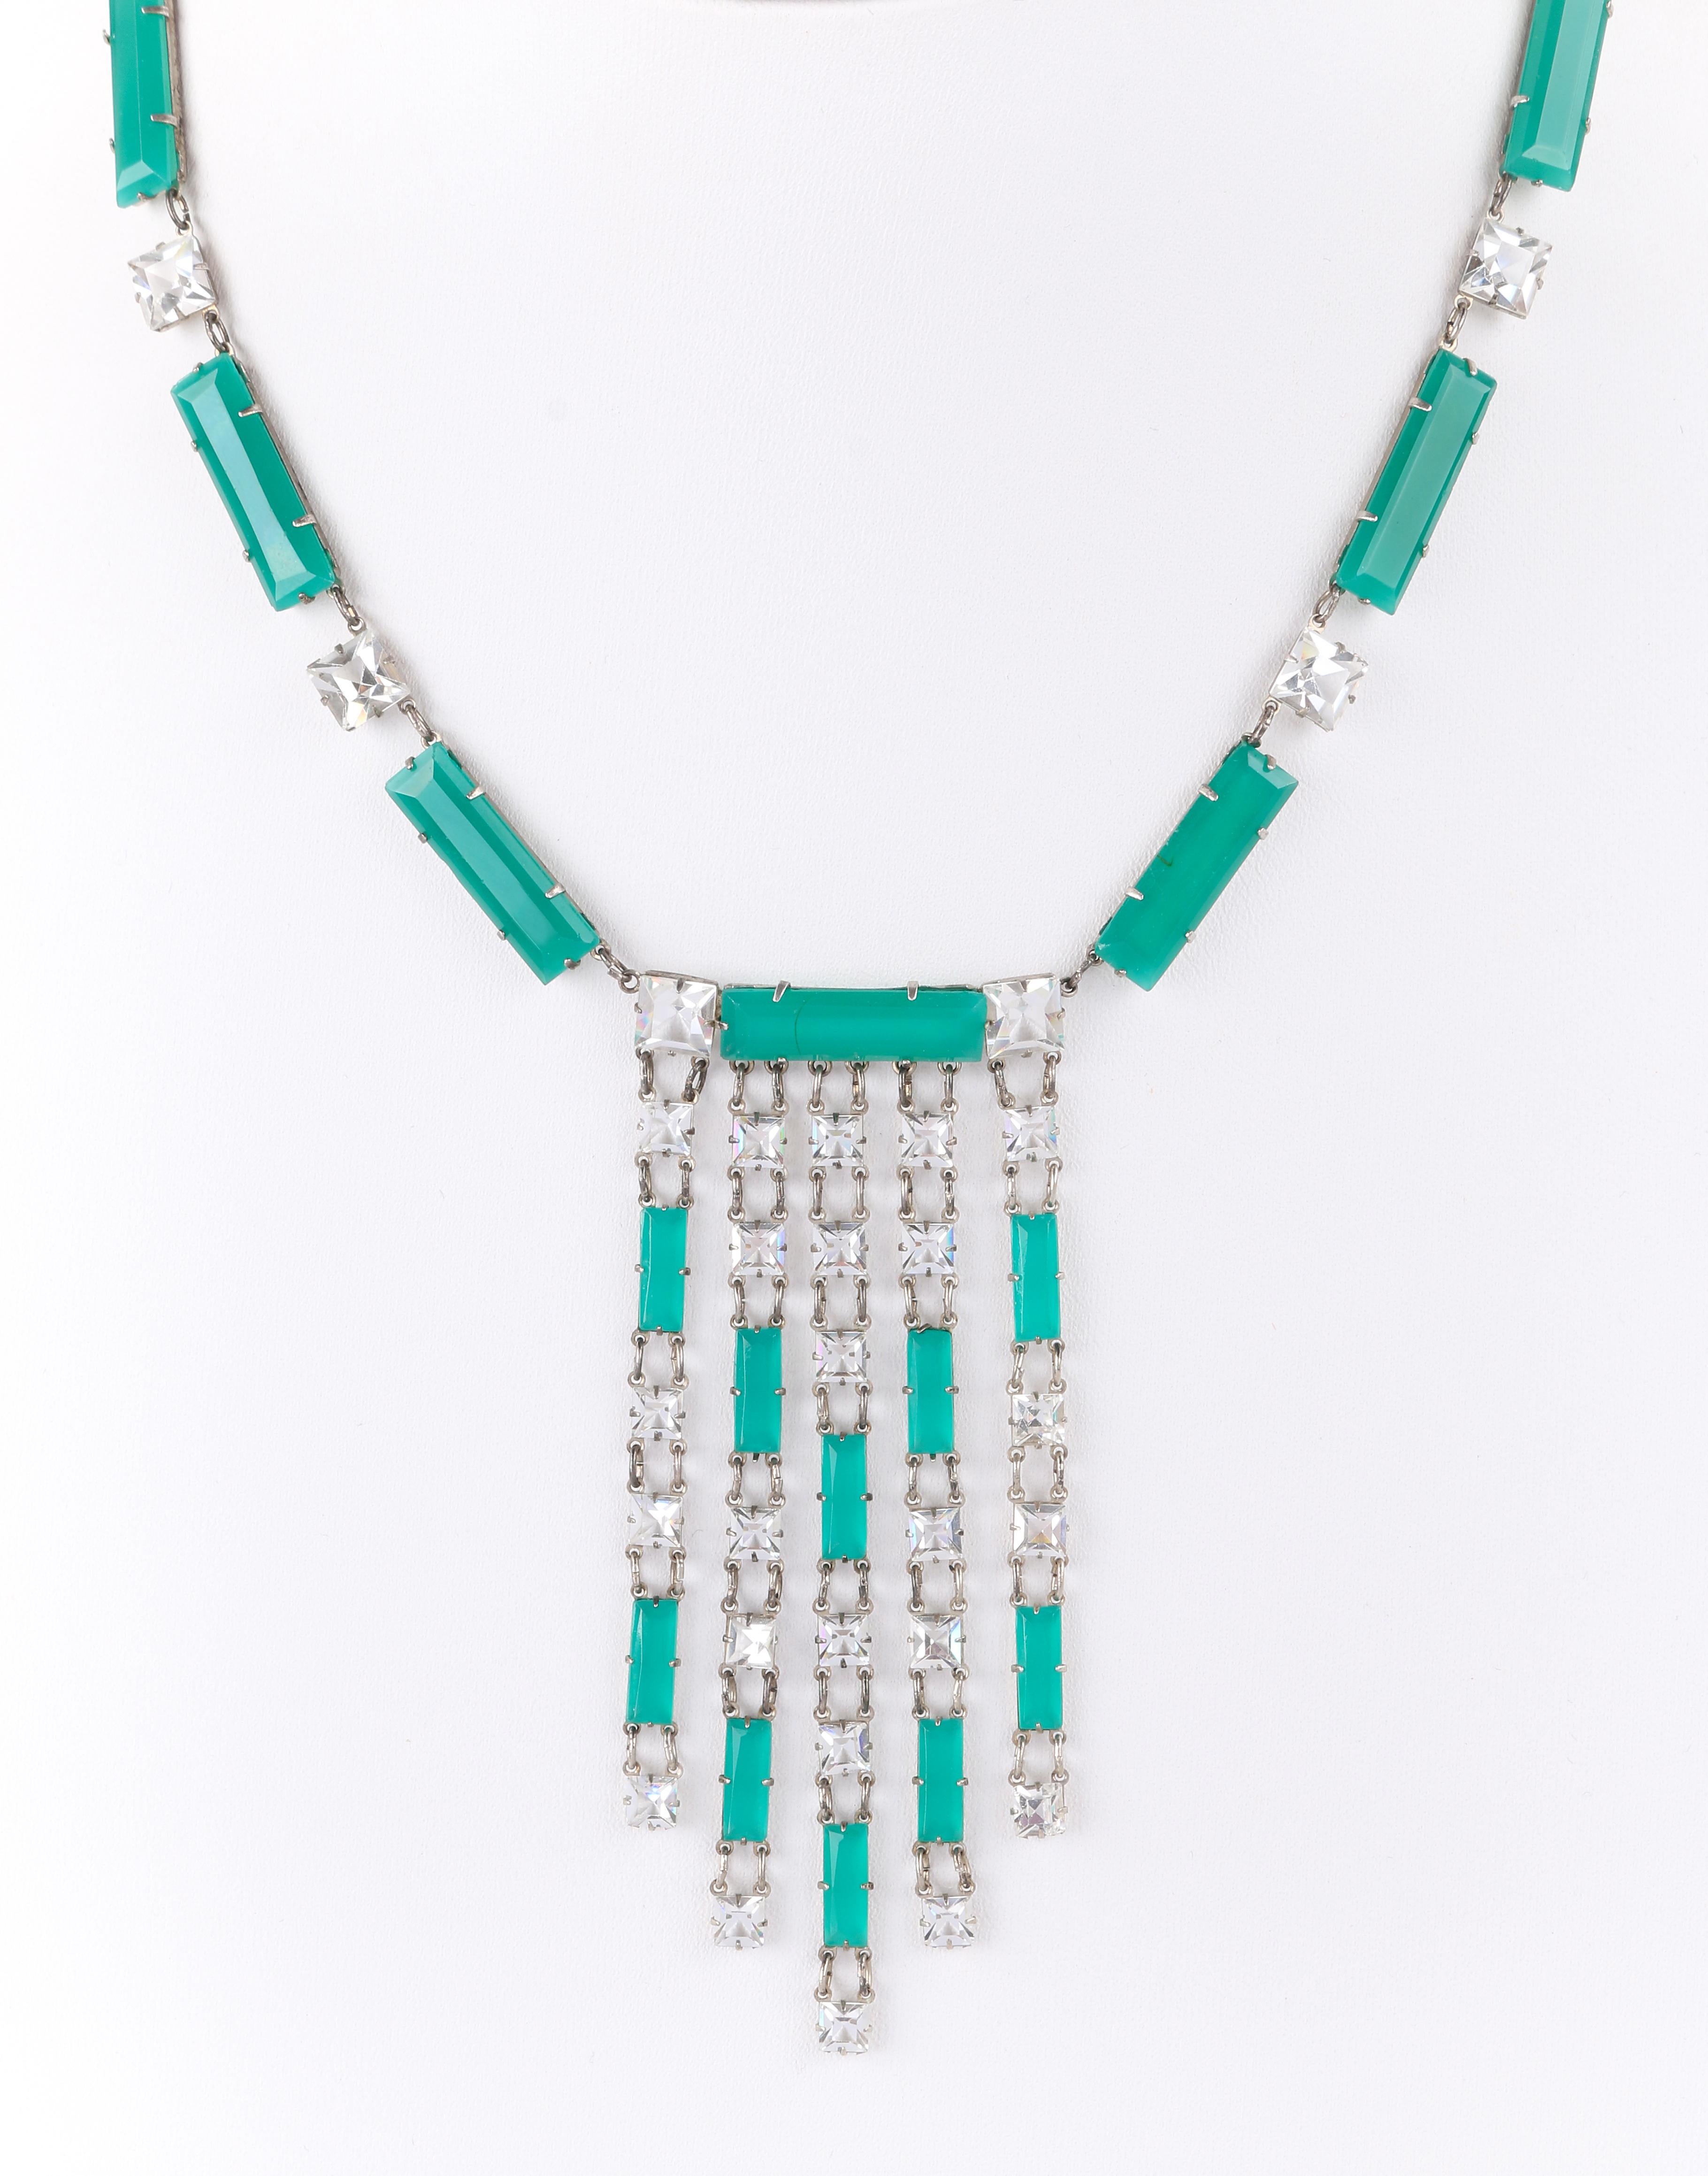 DESCRIPTION: ART DECO c.1920's Emerald & Clear Glass Sterling Silver Bib Pendant Necklace
 
Circa: c.1920’s
Markings: Sterling
Style: Fringe pendant necklace
Color(s): Shades of green, clear and silver
Marked Material: Sterling
Unmarked Material